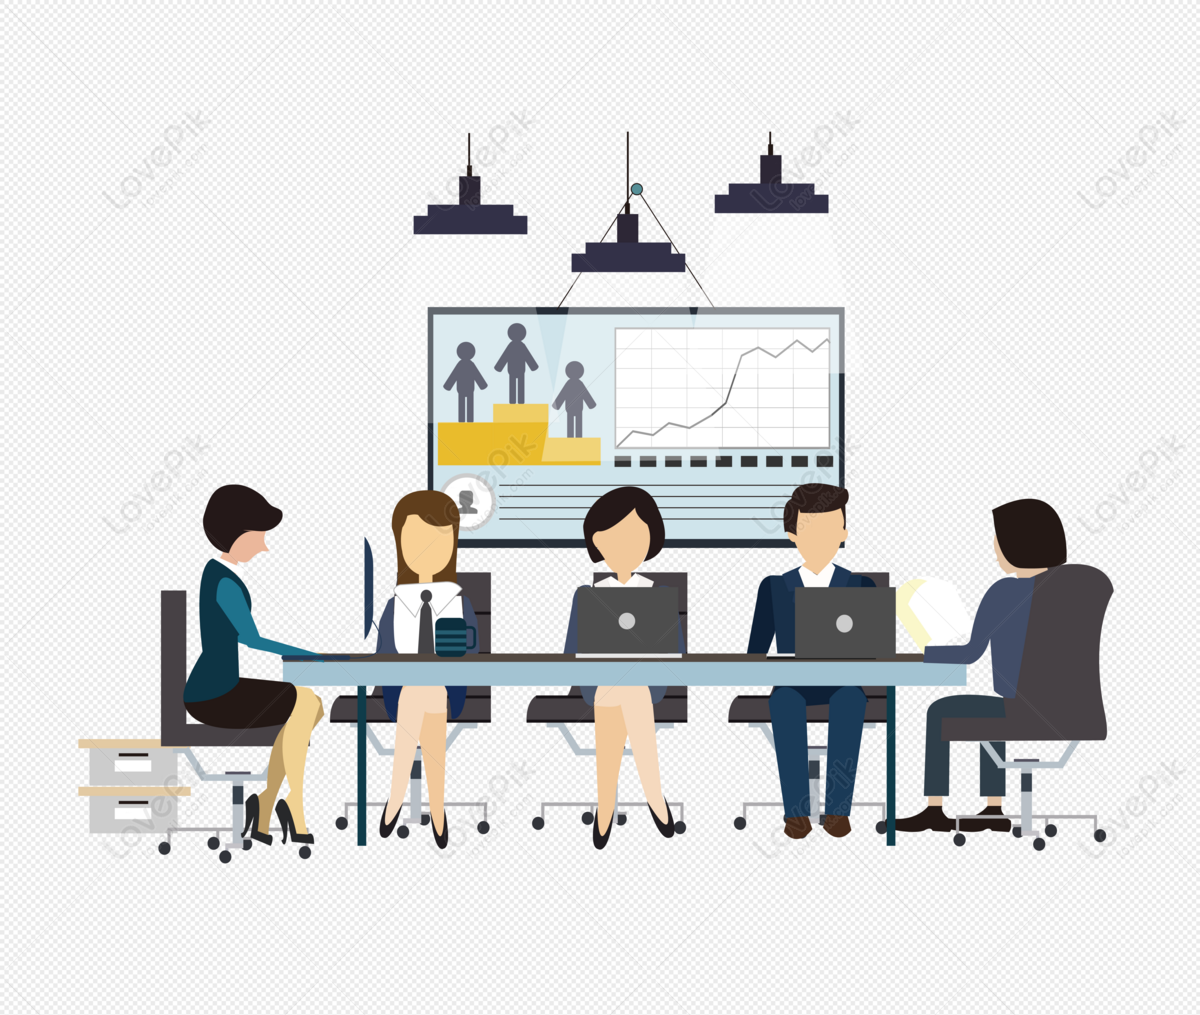 Business Meeting PNG Image Free Download And Clipart Image For Free  Download - Lovepik | 400196901